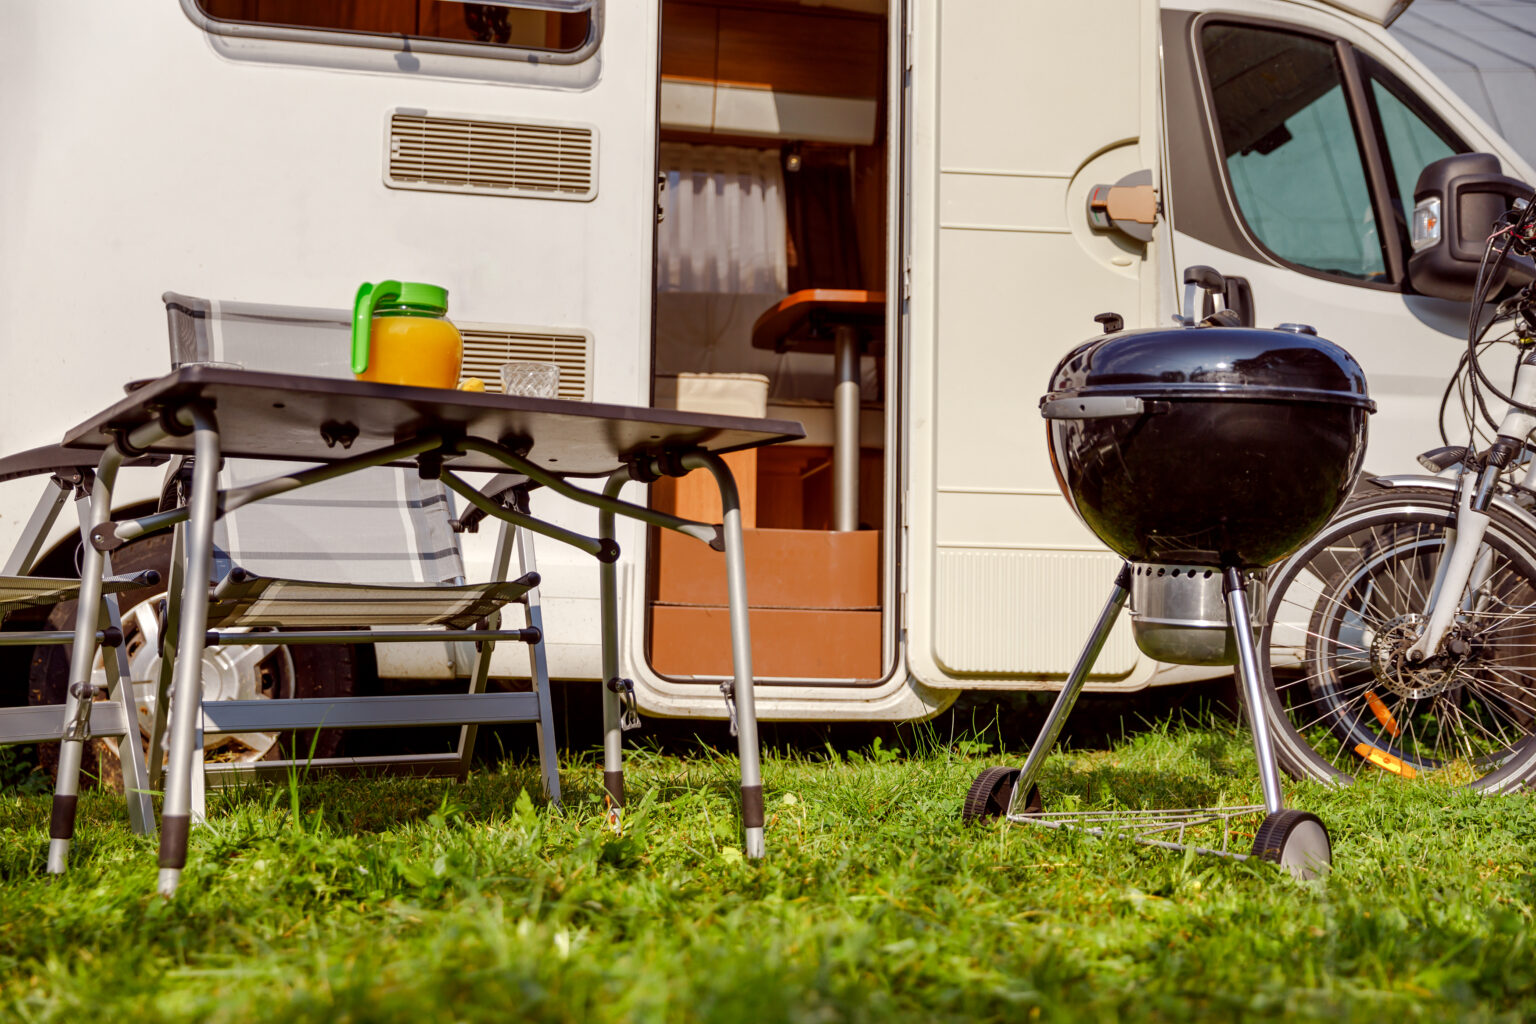 rv parked at campsite with bicycles, grill, table and chairs